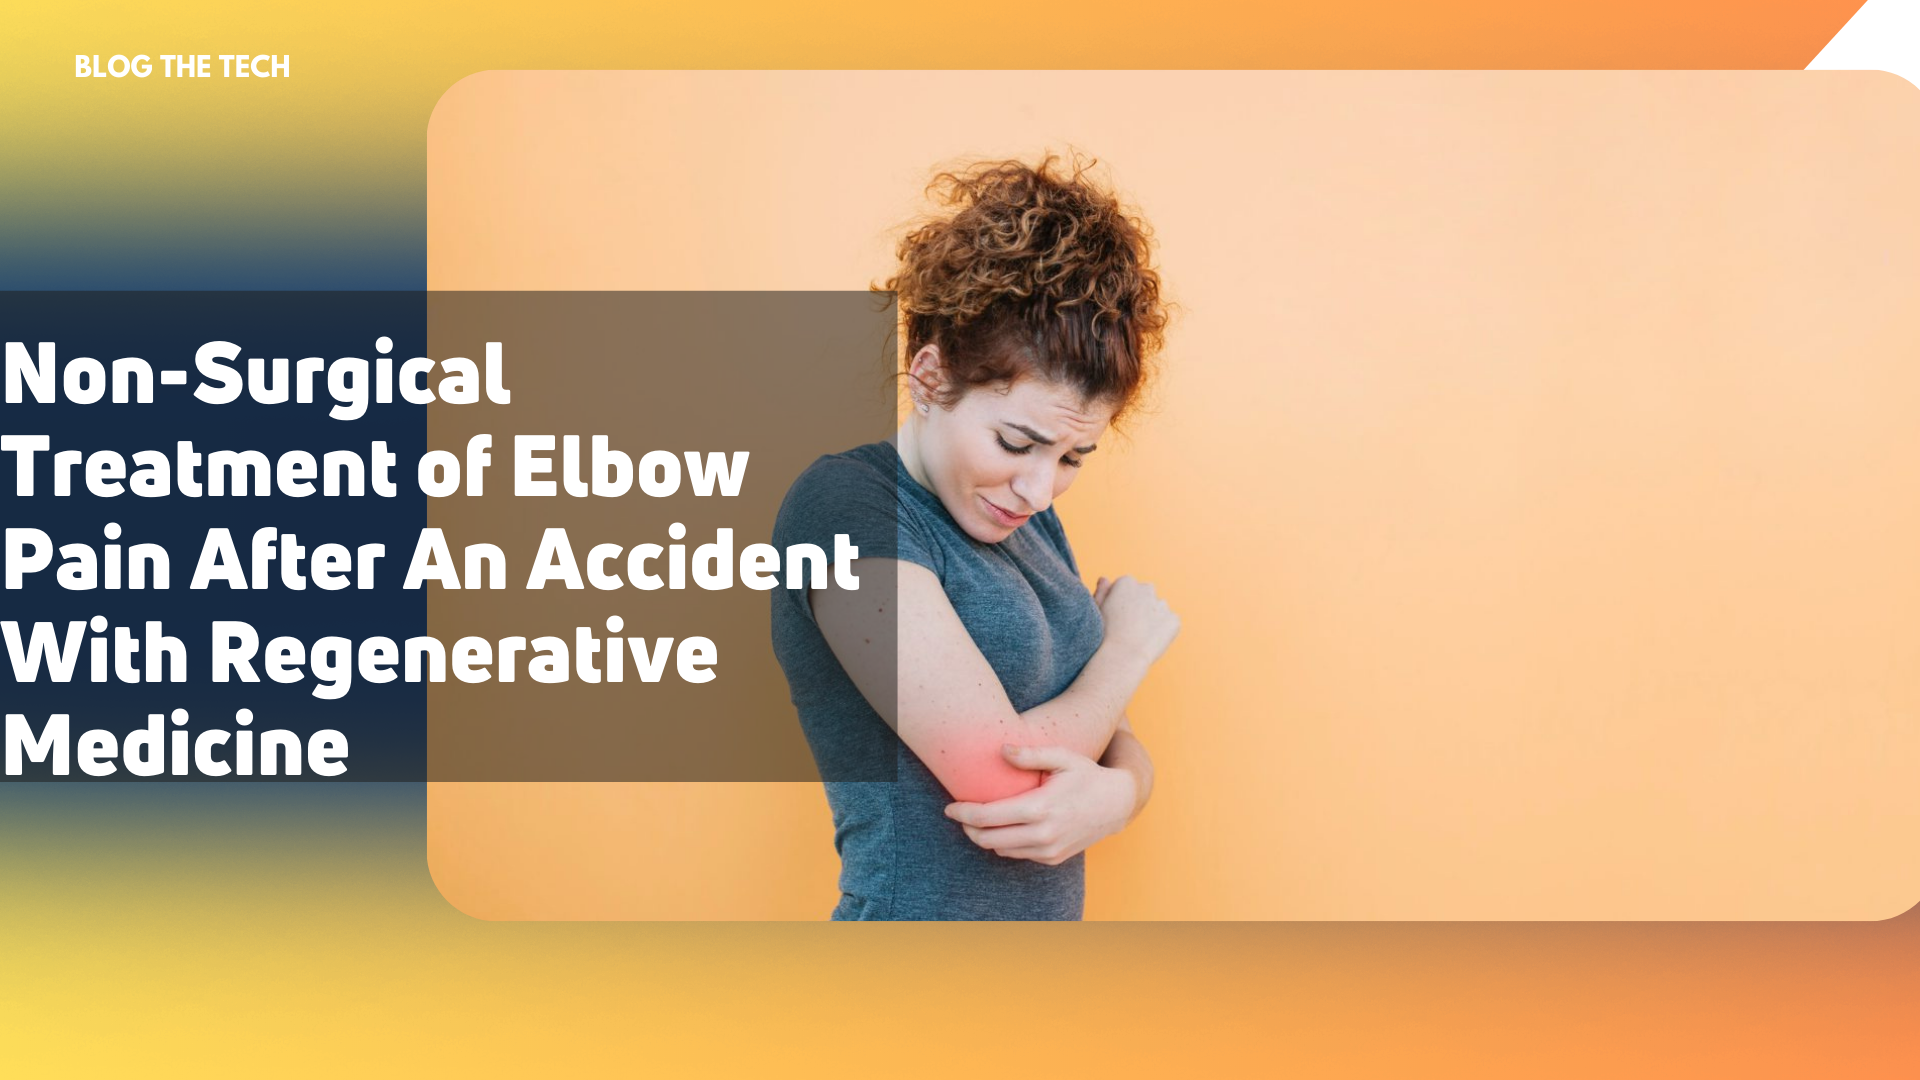 Non-Surgical Treatment of Elbow Pain After An Accident With Regenerative Medicine